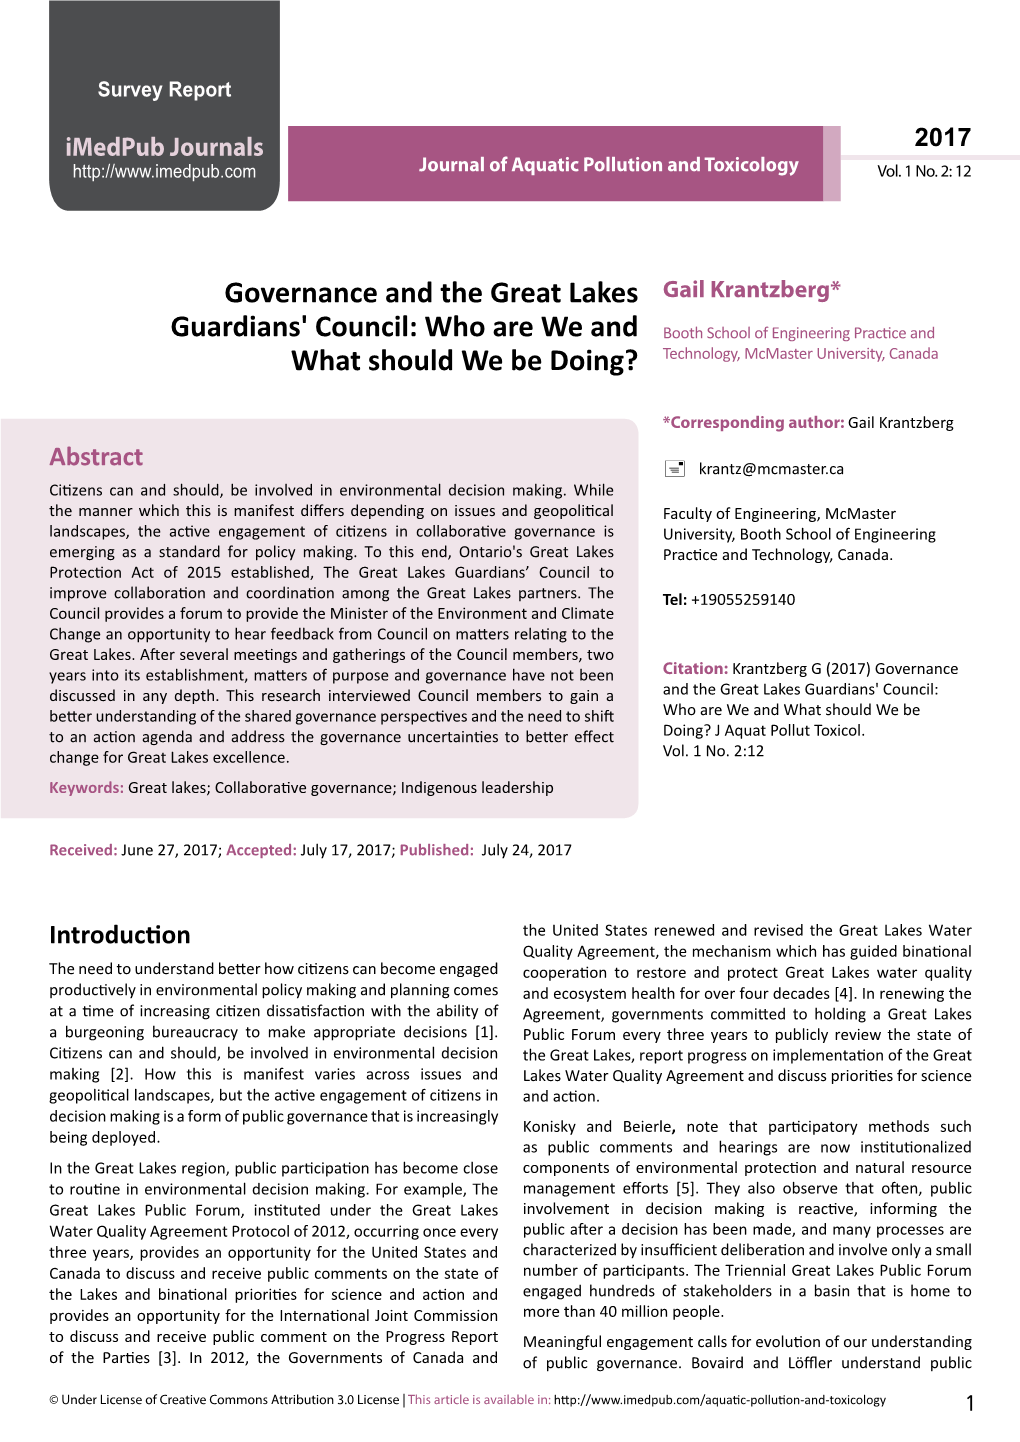 Governance and the Great Lakes Guardians' Council: Who Are We